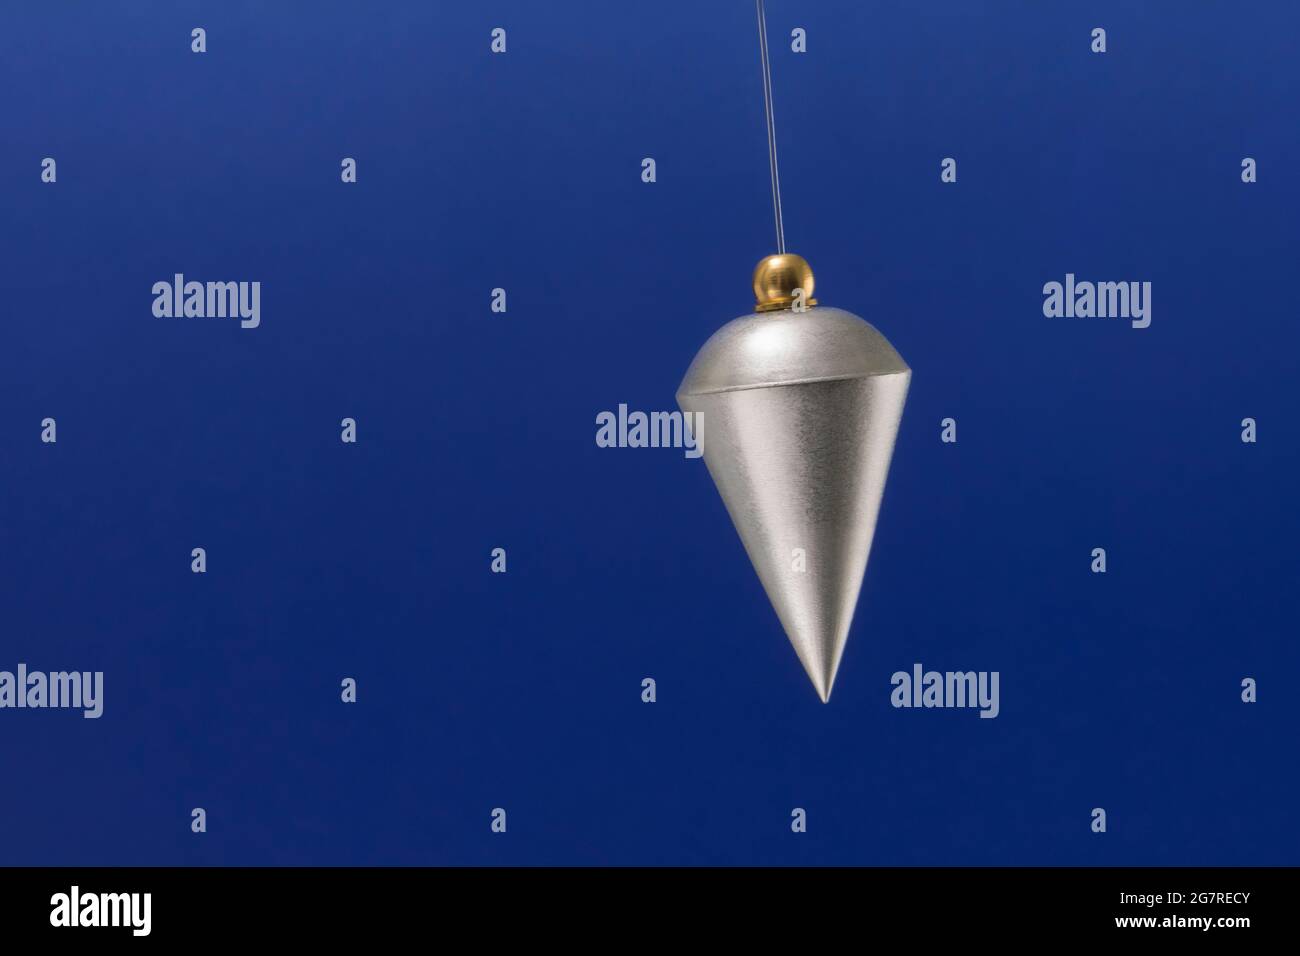 A silver pendulum swinging from side to side Stock Photo